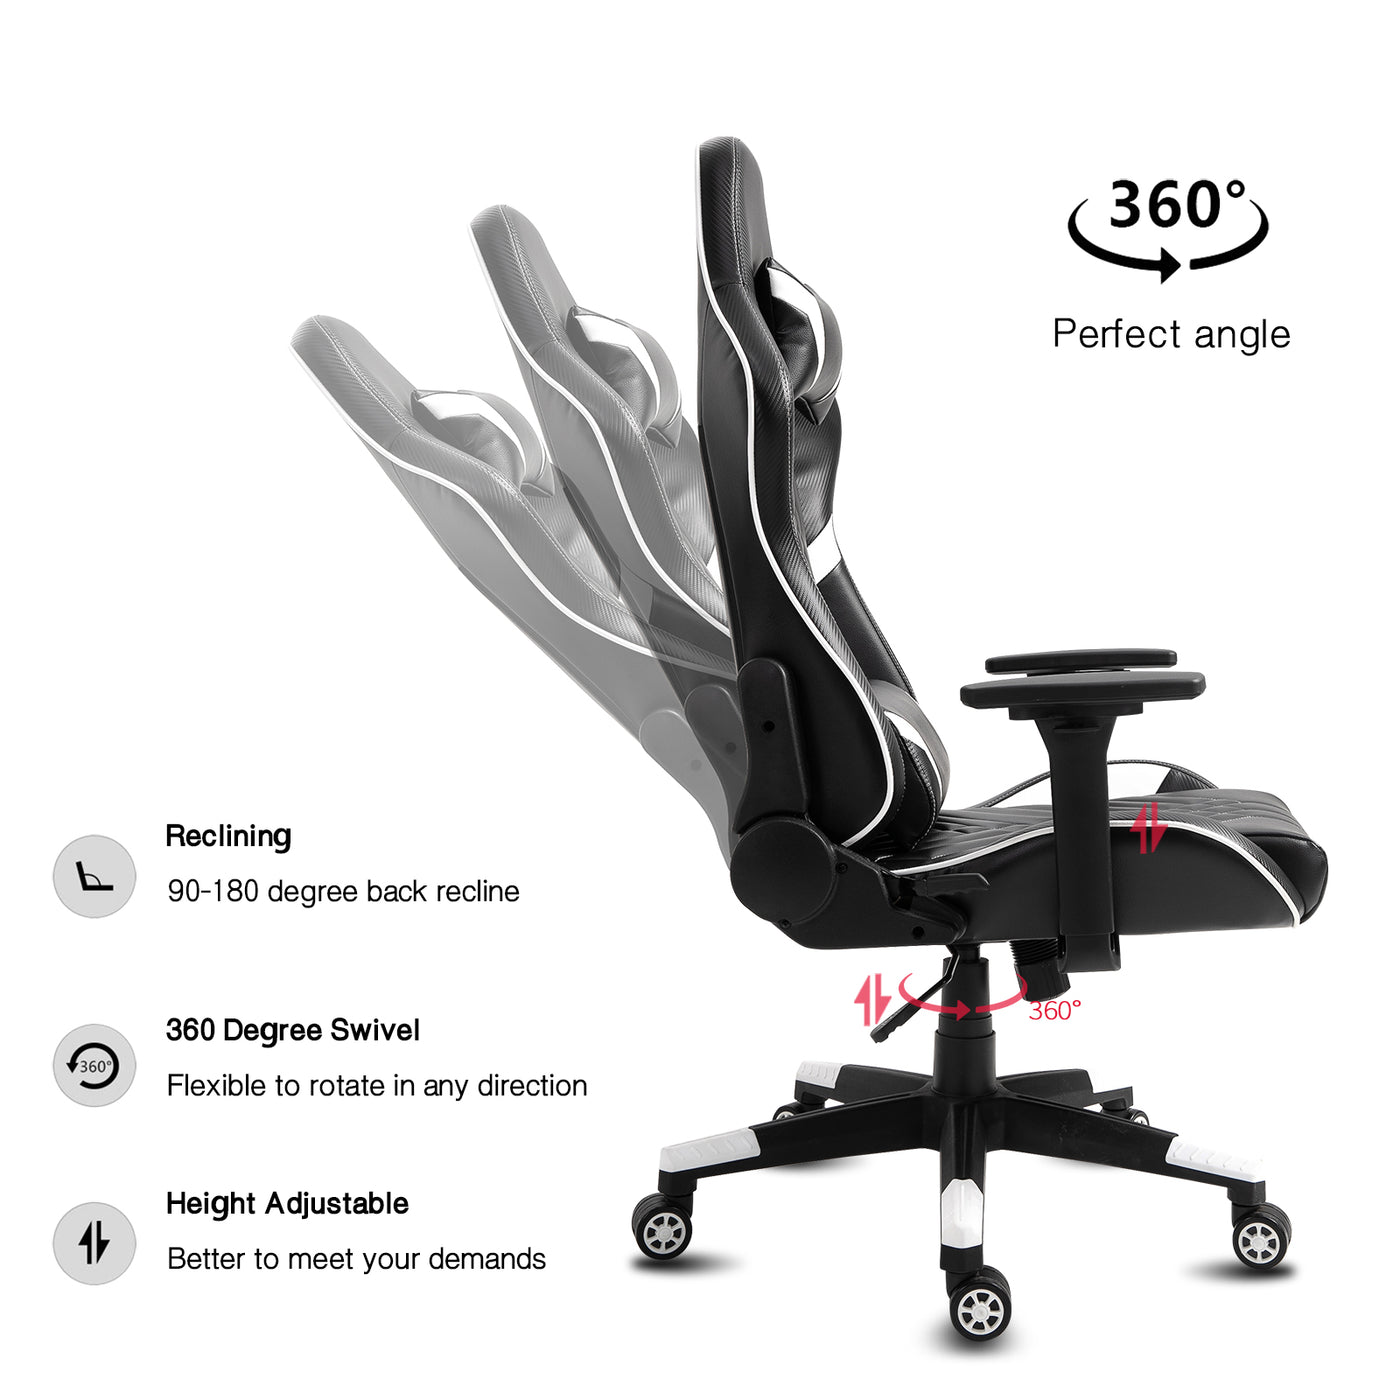 Racing Gaming Chairs Ergonomic Computer Office Seats Executive Chairs W/Armrest